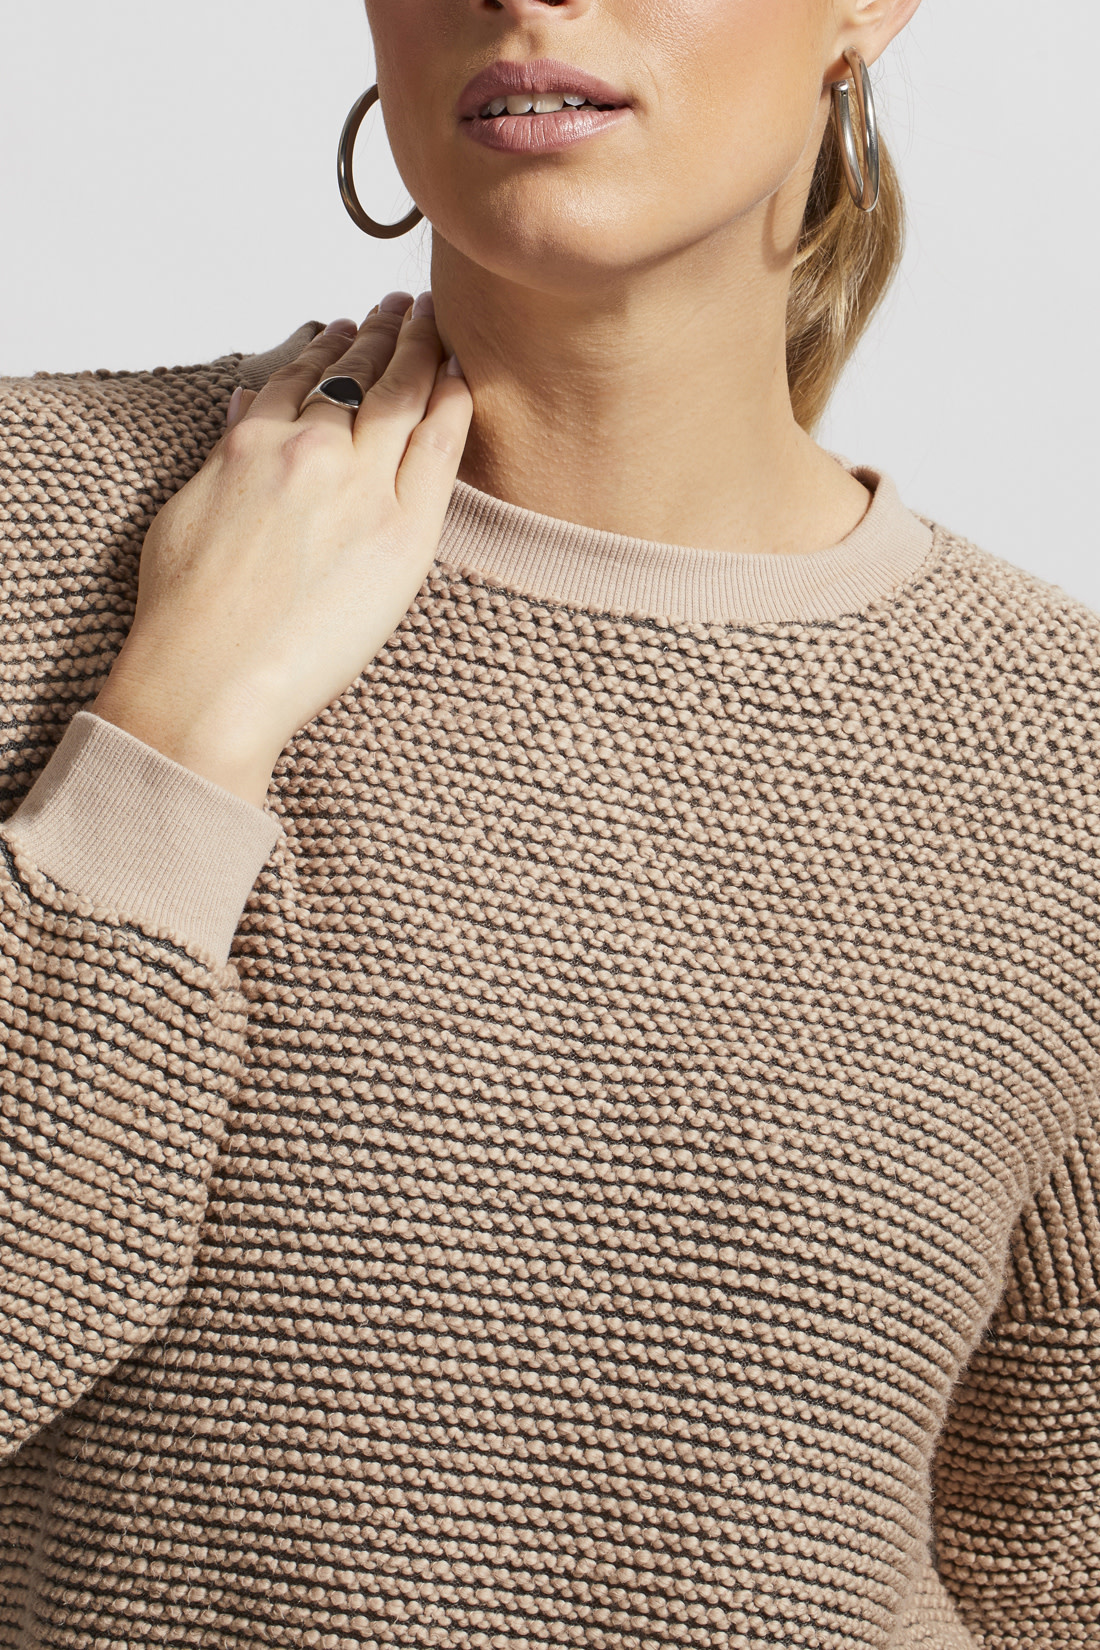 Wide Crew Neck Tunic Top with Side Slits - Cashmere